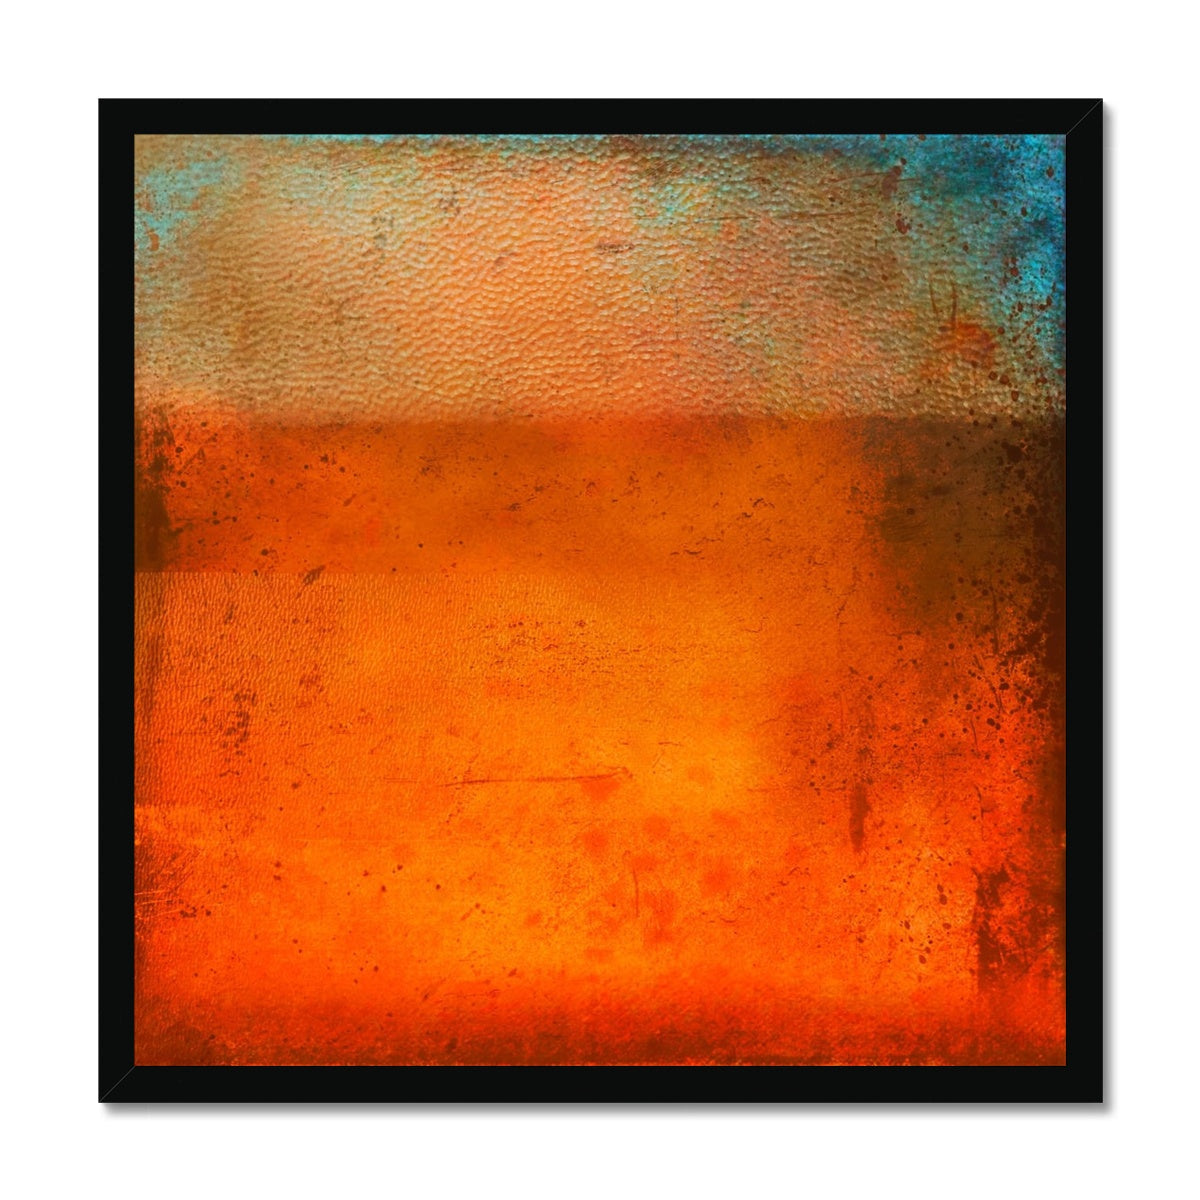 Sunset Horizon Abstract Painting | Framed Prints From Scotland-Framed Prints-Abstract & Impressionistic Art Gallery-20"x20"-Black Frame-Paintings, Prints, Homeware, Art Gifts From Scotland By Scottish Artist Kevin Hunter